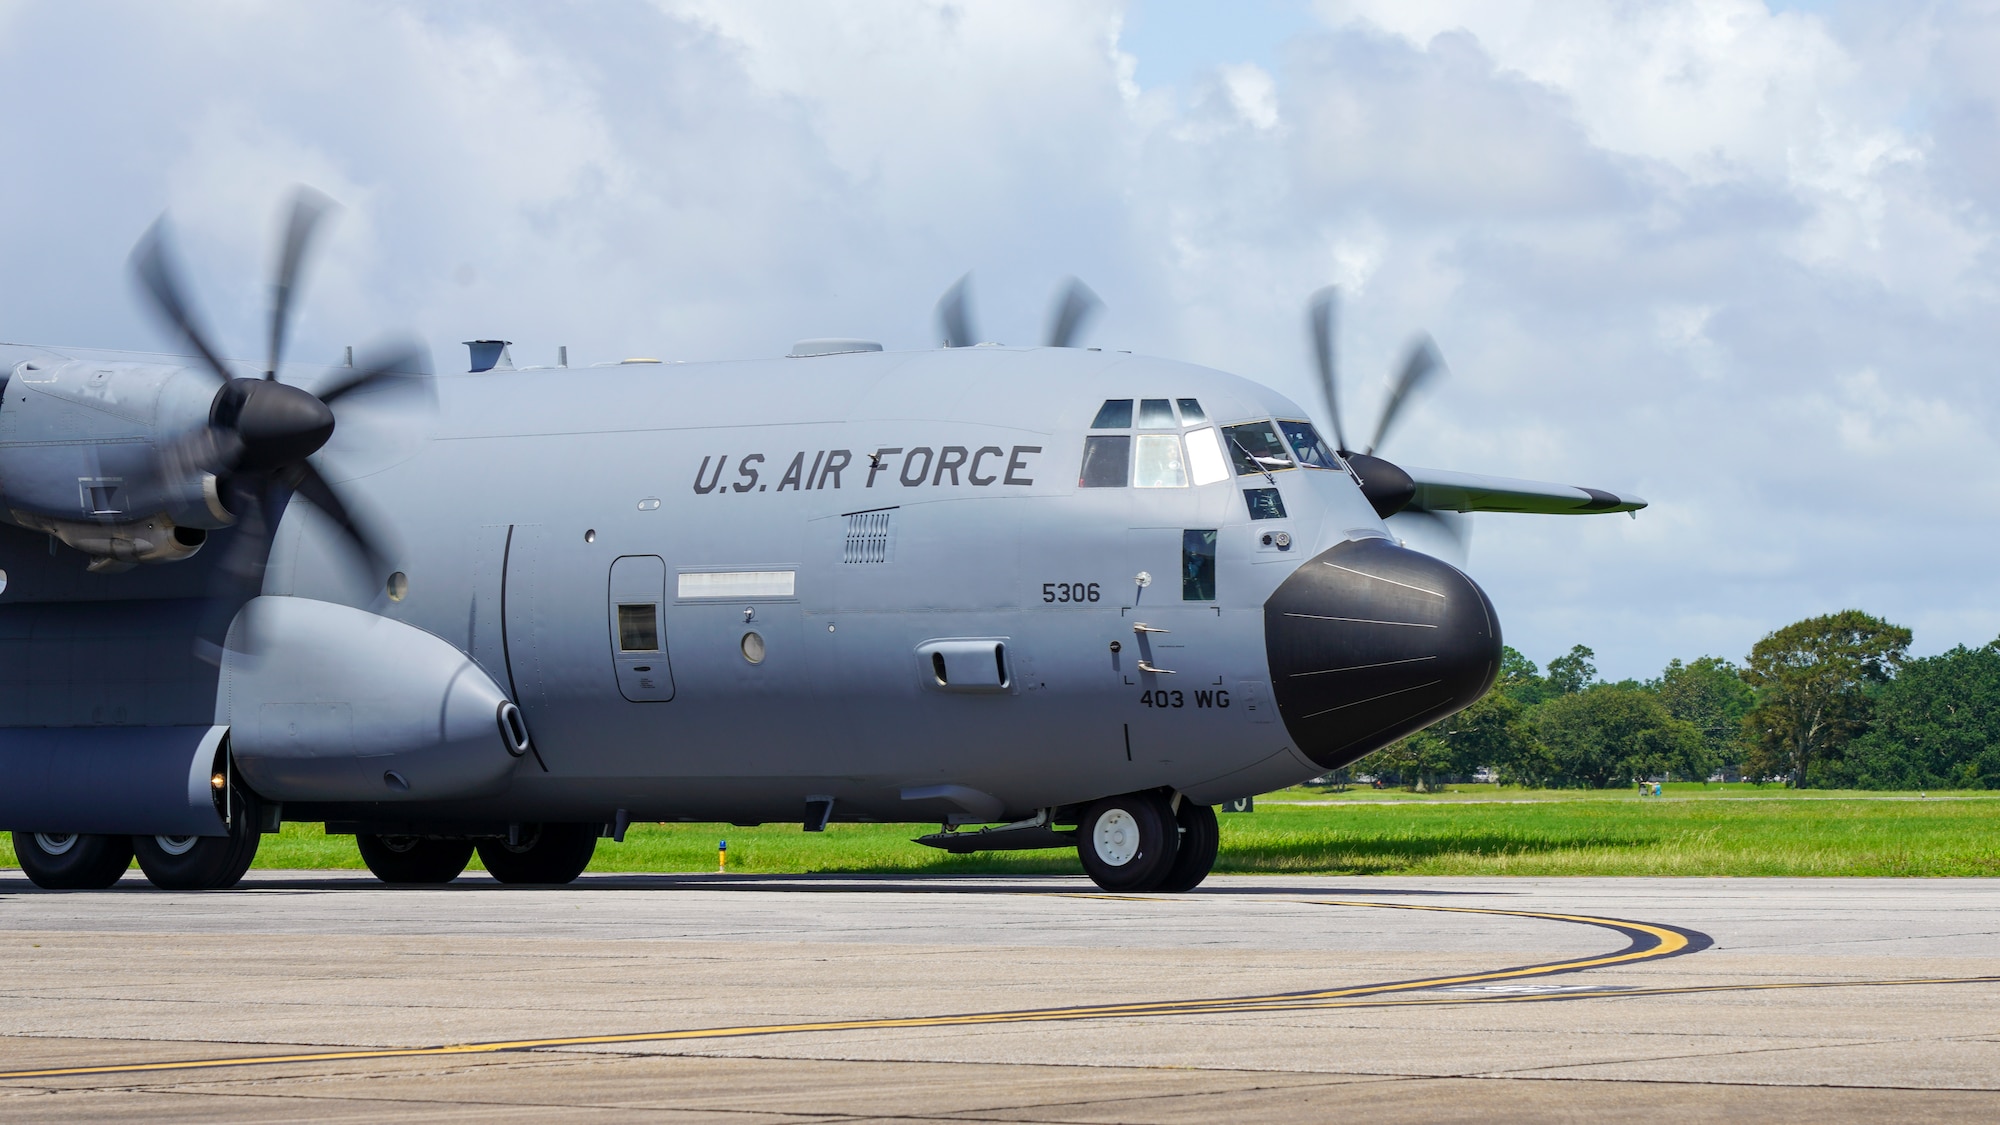 A WC-130J Super Hercules aircraft assigned to the 53rd Weather Reconnaissance Squadron at Keesler Air Force Base, Miss., taxis prior to its functional check flight July 13, 2021. This particular aircraft took off after months of extensive repairs to its wing caused by a fire that left a basketball-sized hole in the wing. (U.S. Air Force photo by 2nd Lt. Christopher Carranza)